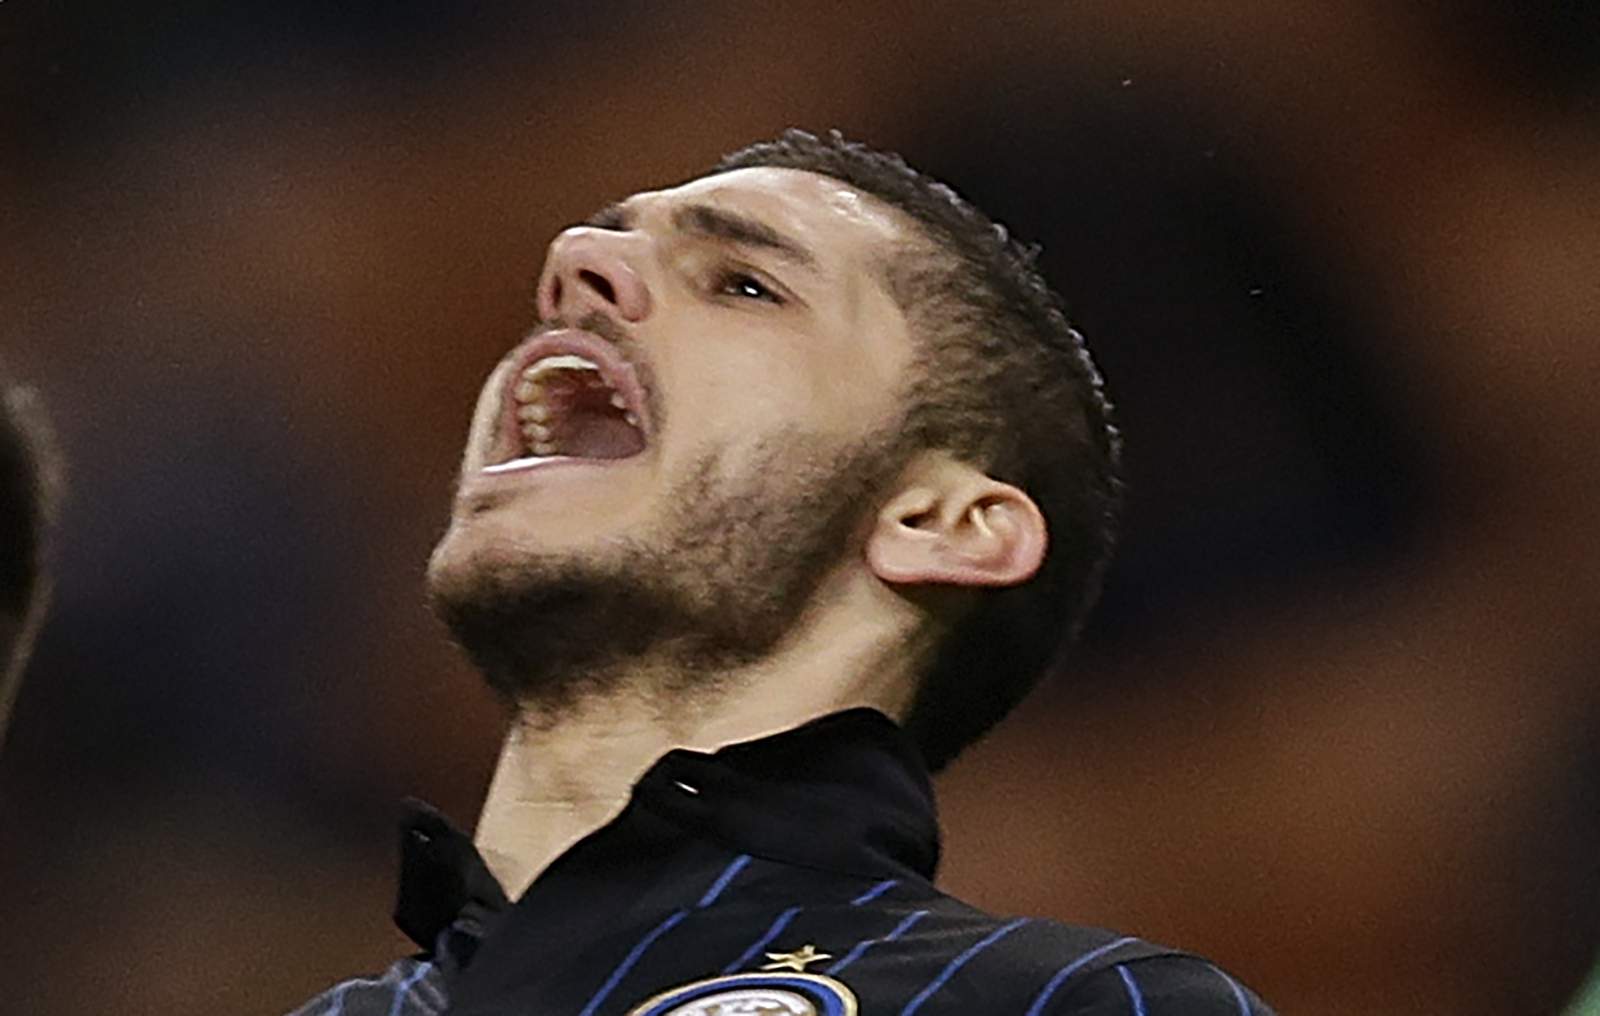 Icardi's arrival at PSG could push Cavani to look elsewhere